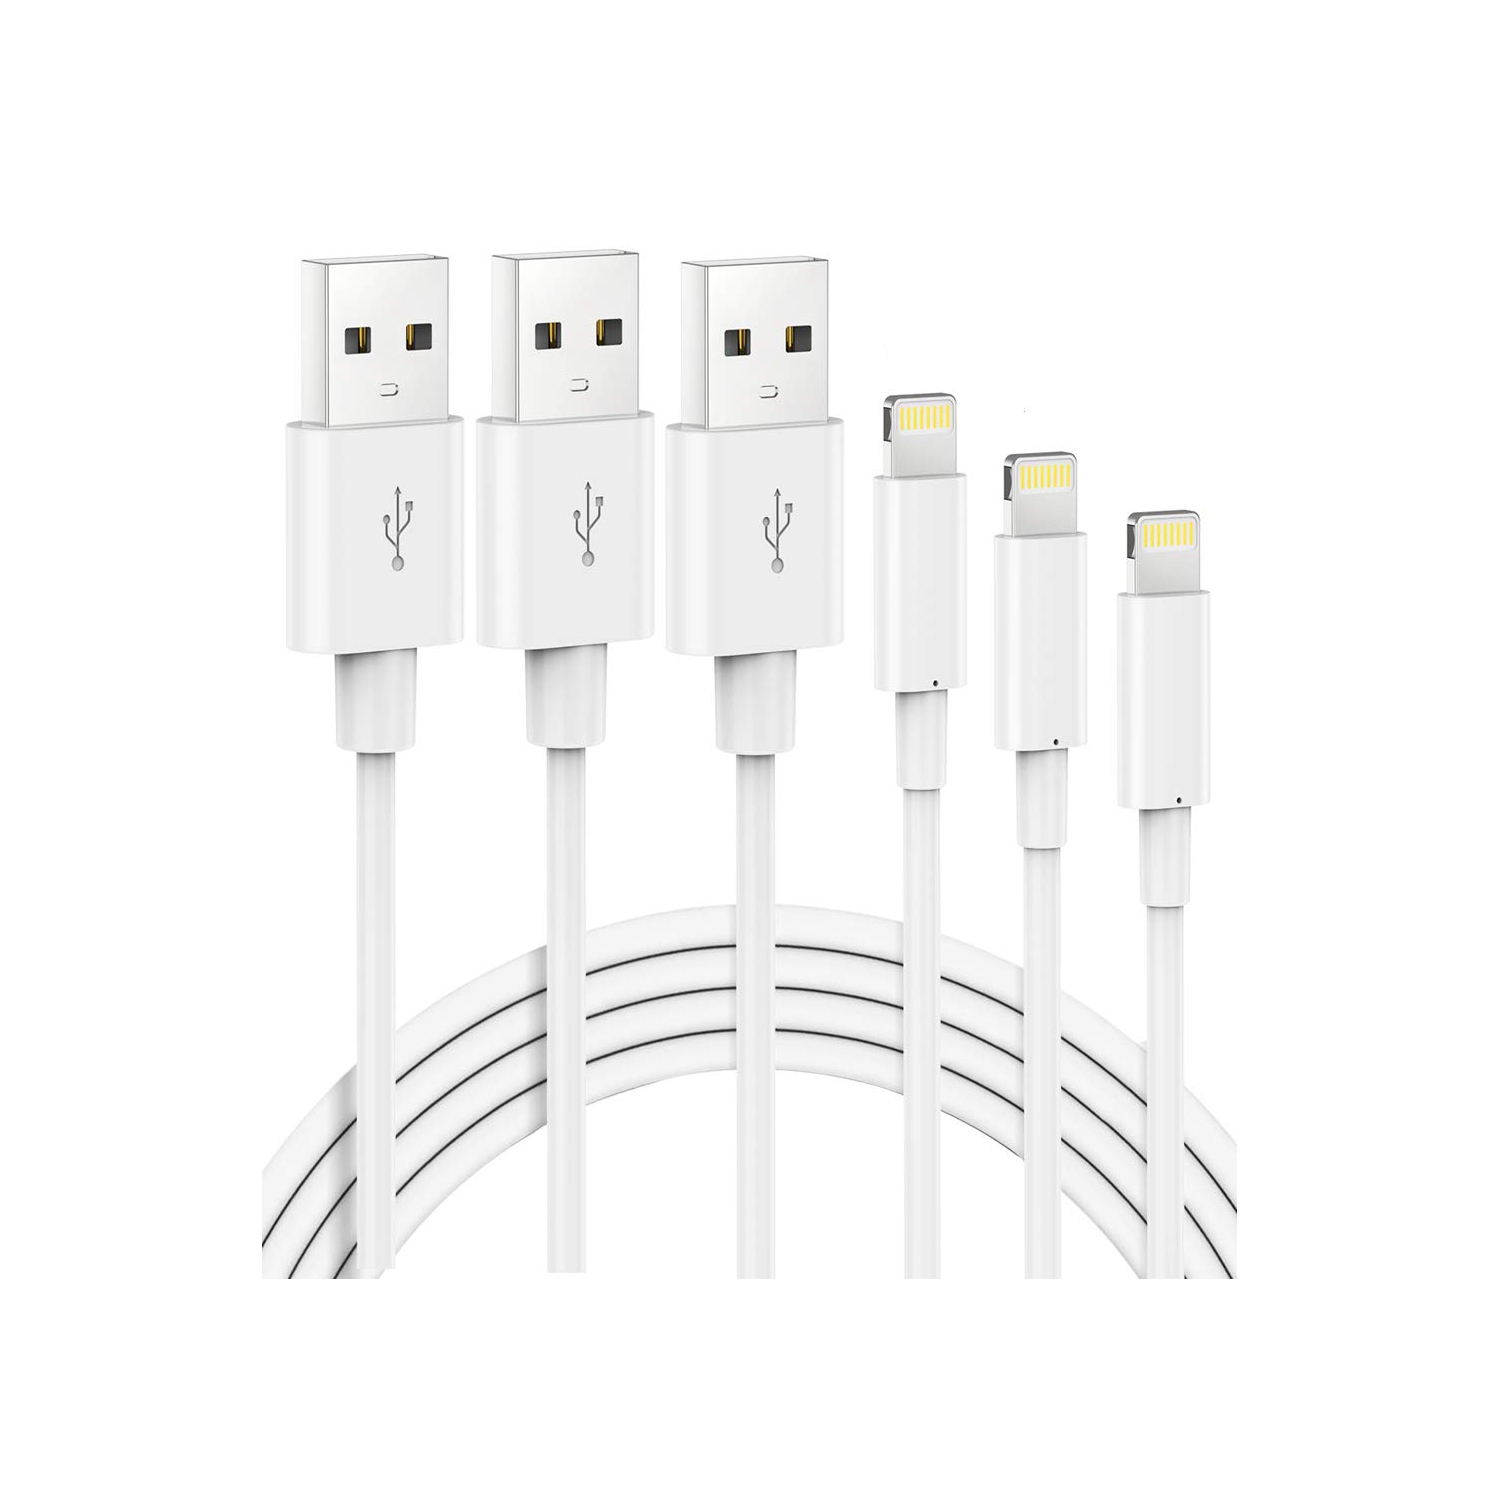 Wingomart Apple MFi Certified Fast Charging & Syncing Lightening to USB Cable for iPhone 11, X, 8, 7, 6s, 6, Plus, 5s, 5c, SE, iPads, & iPods - 3 Pack